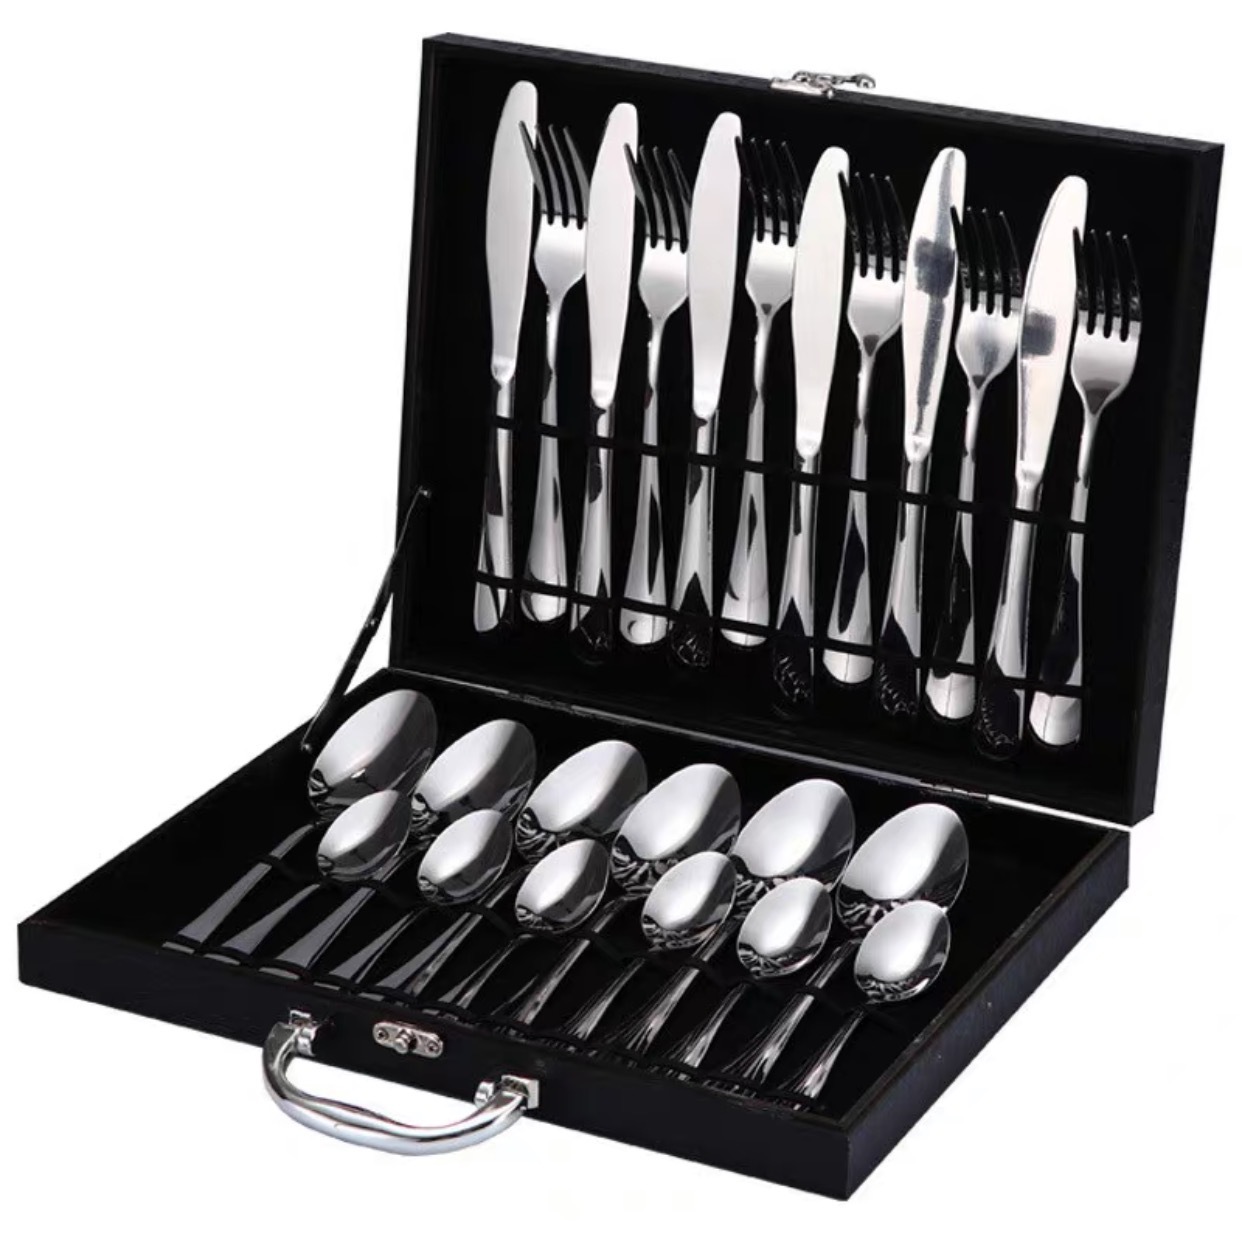 Foreign Trade Cross-Border Knife, Fork and Spoon Tea Spoon 410 Stainless Steel Tableware 24-Piece Set Black Wooden Box Exclusive for Export Supply